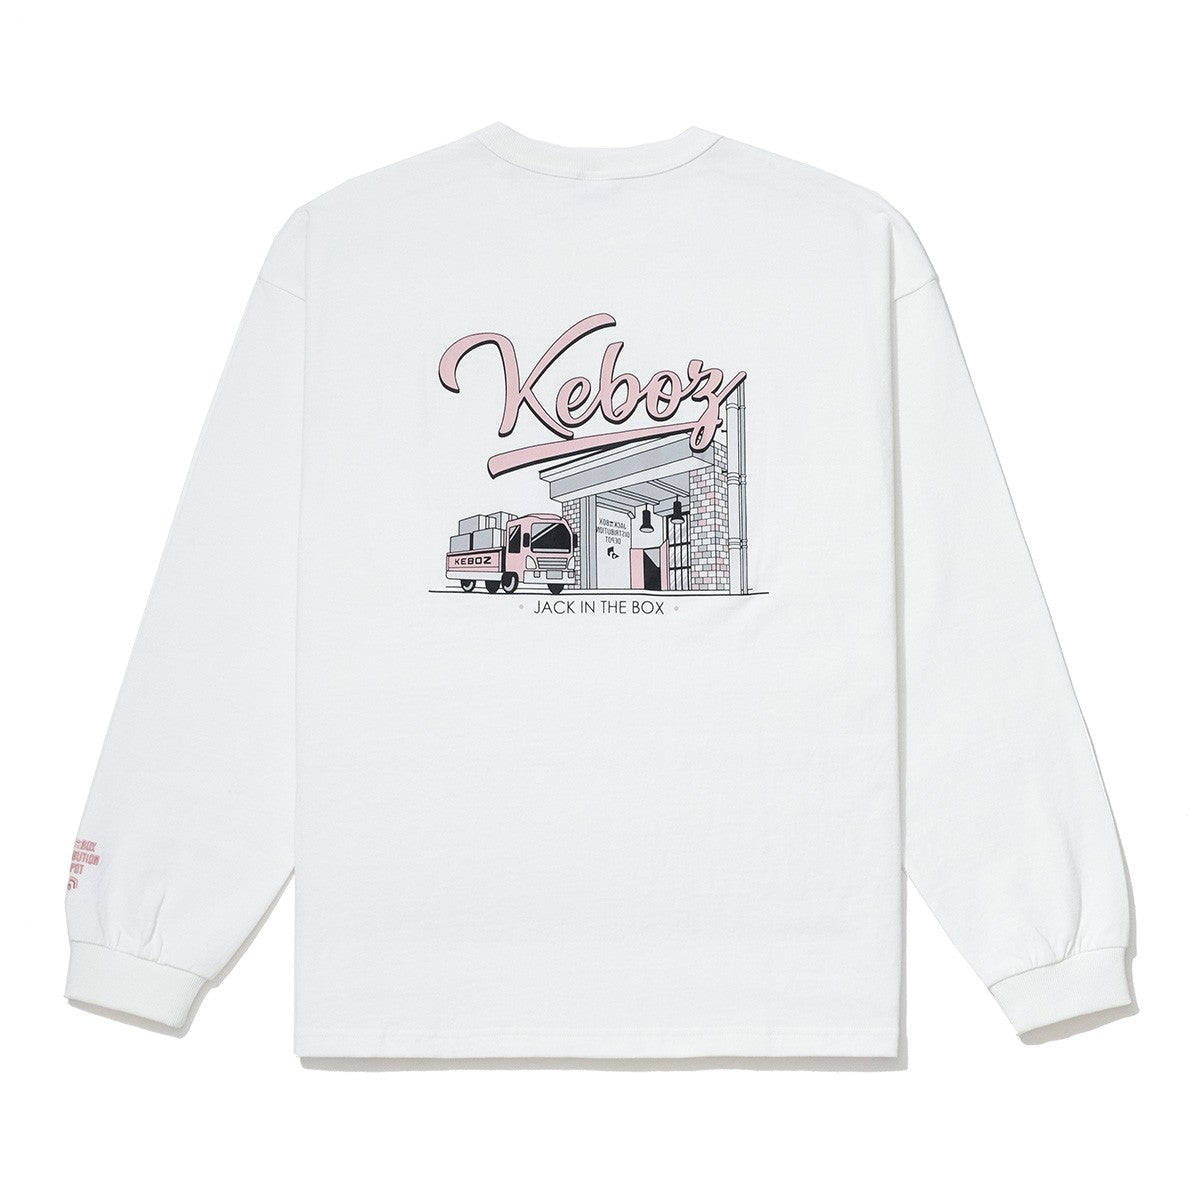 KEBOZ / JACK IN THE BOX 12 YEAR ANNIVERSARY L/S TEE